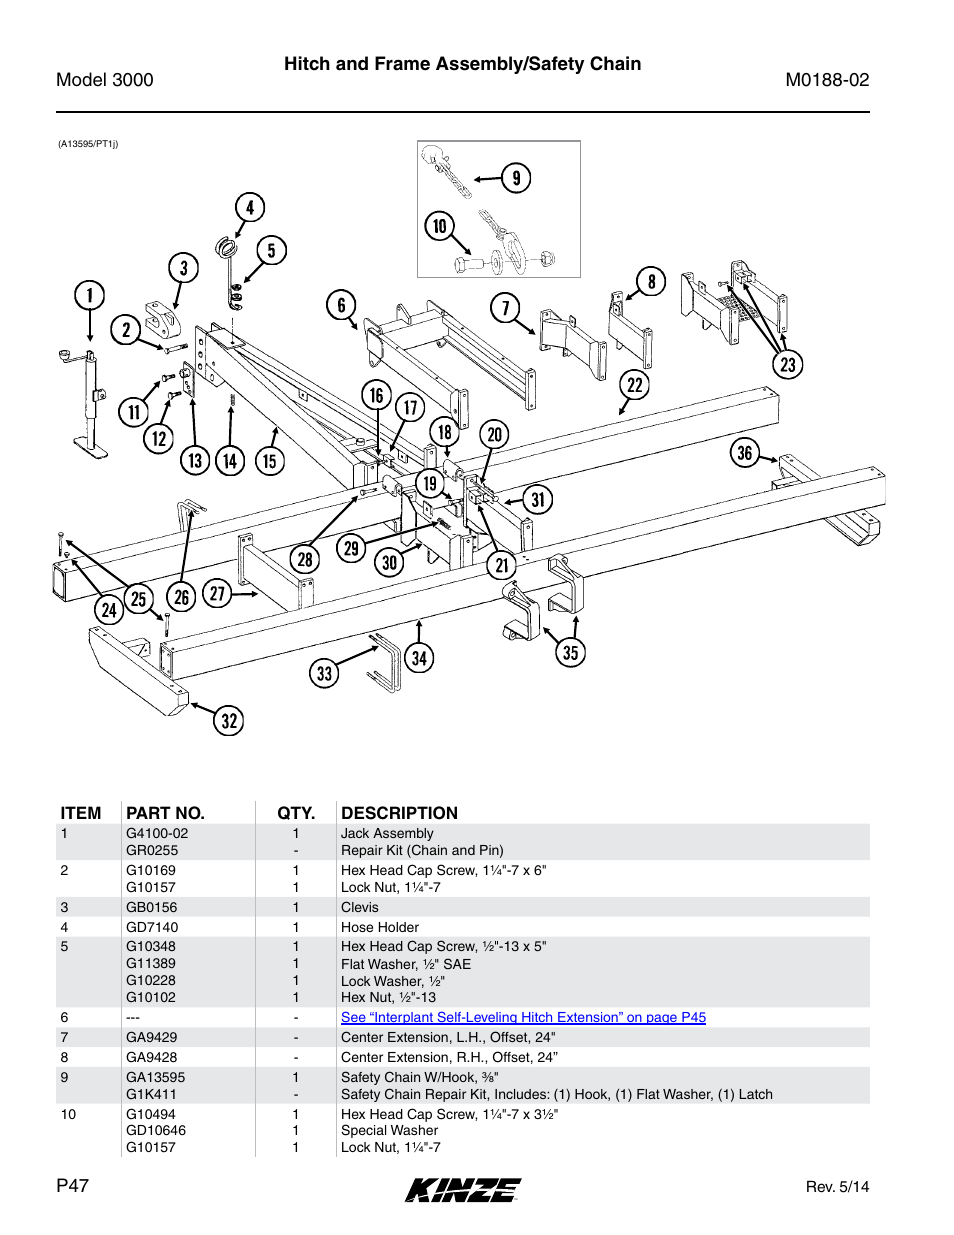 Base machine, Hitch and frame assembly/safety chain | Kinze 3000 Rigid Frame Planter Rev. 5/14 User Manual | Page 50 / 154